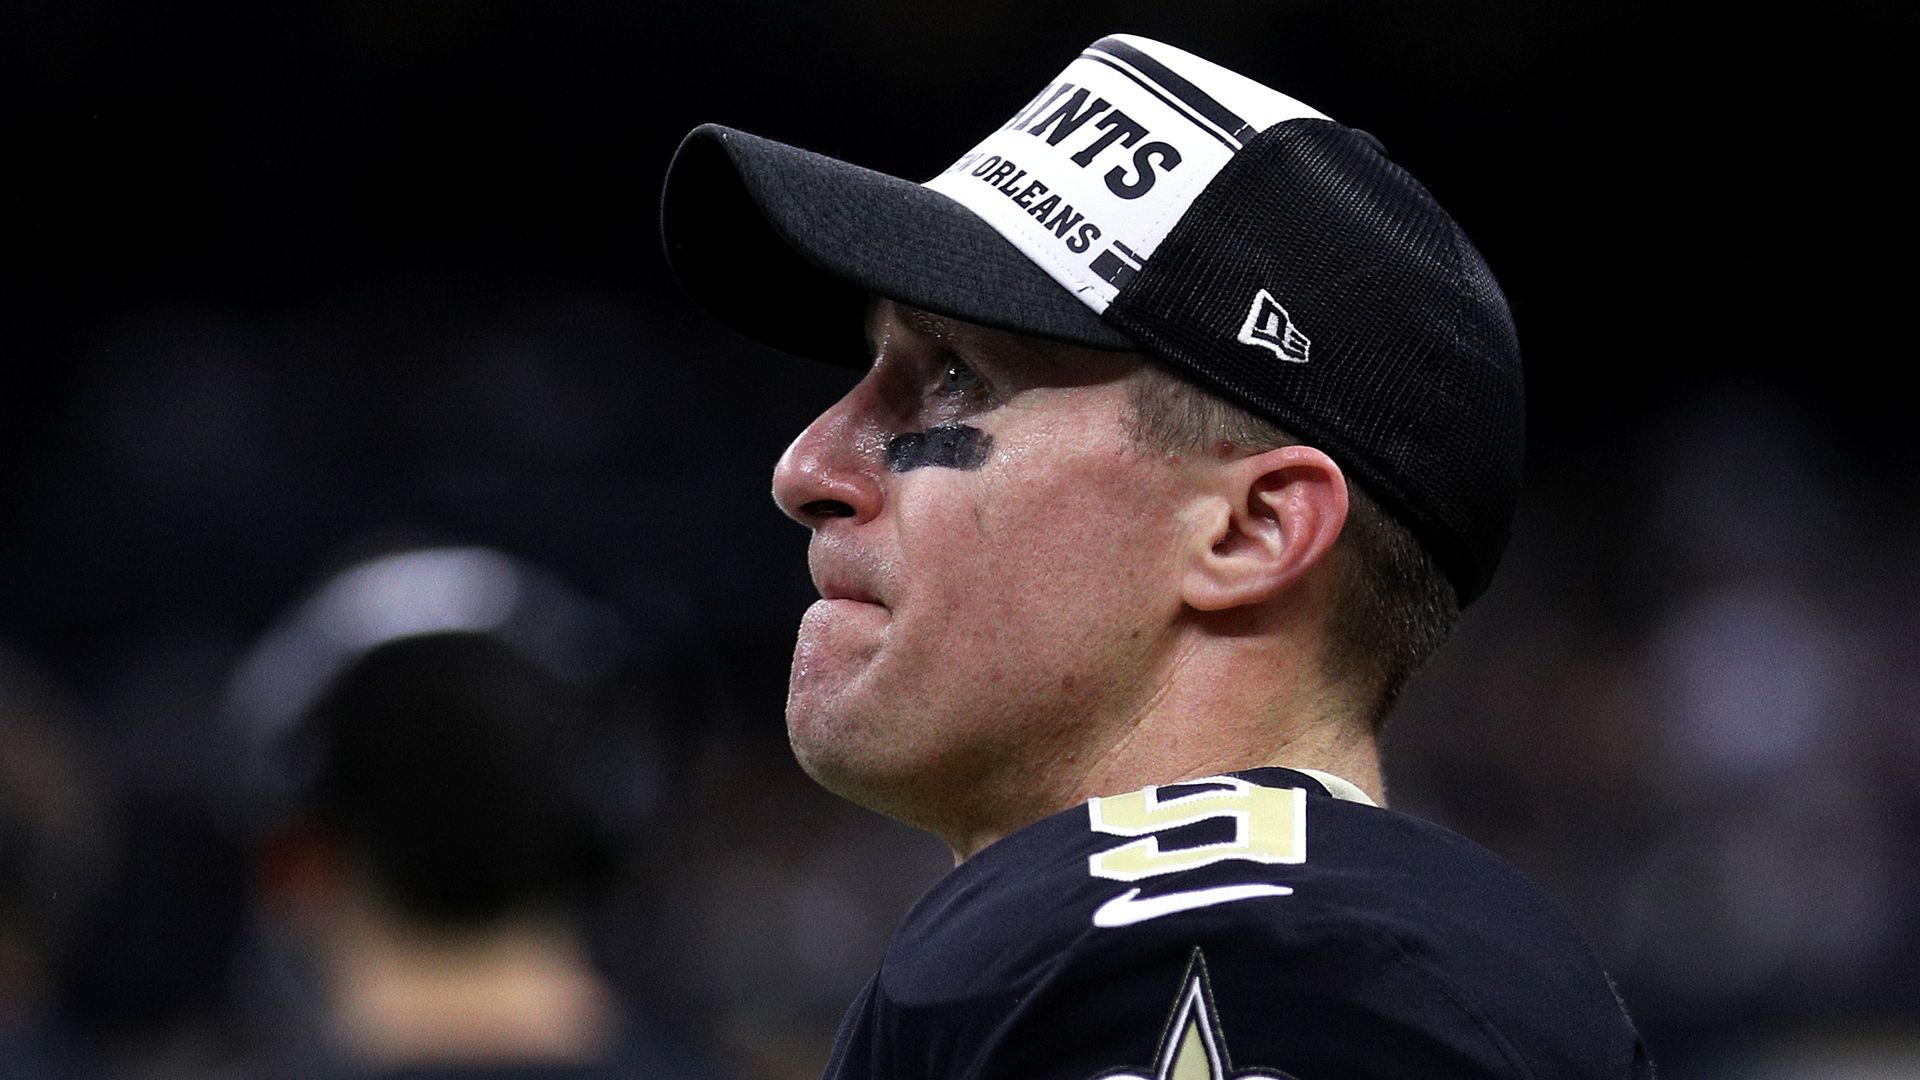  Quarterback Drew Brees #9 of the New Orleans Saints reacts to his 540th career touchdown pass.